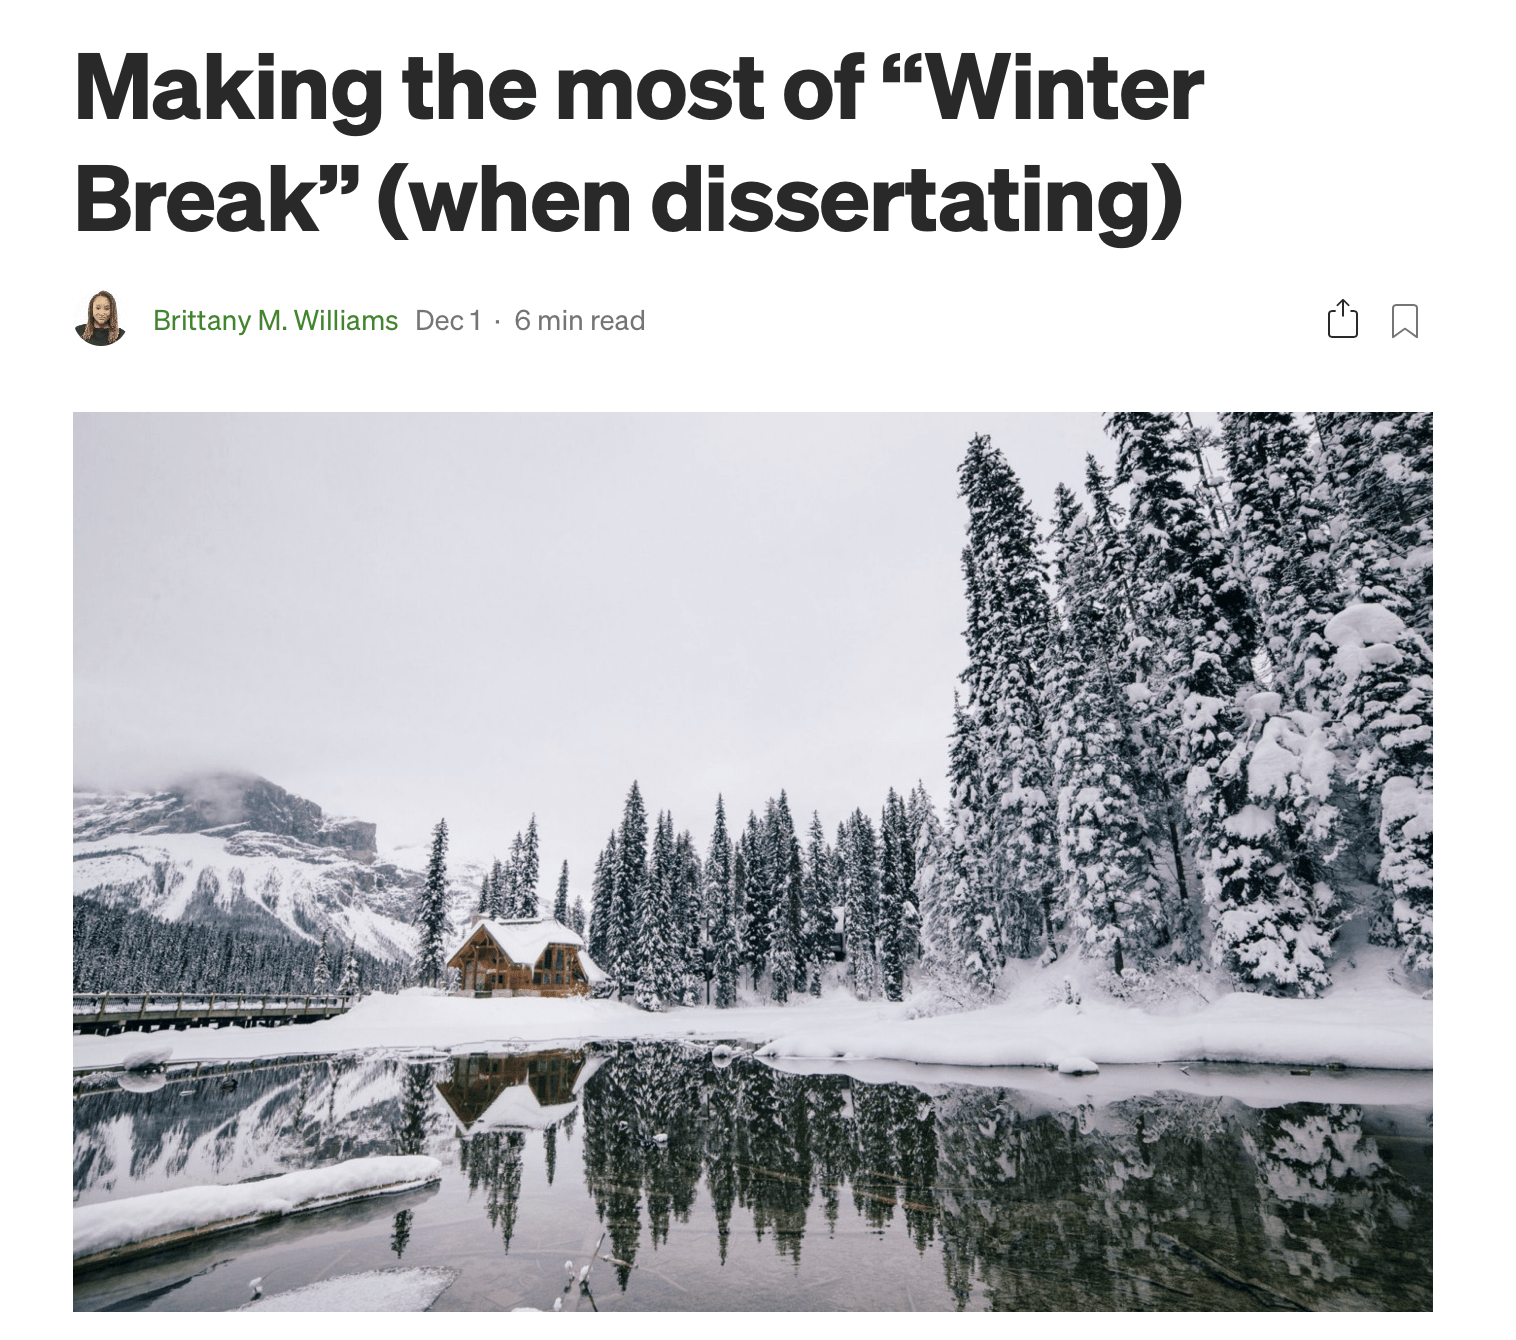 Check out Dr. Williams' Advice for "Making the most of 'Winter Break' (when dissertating)"